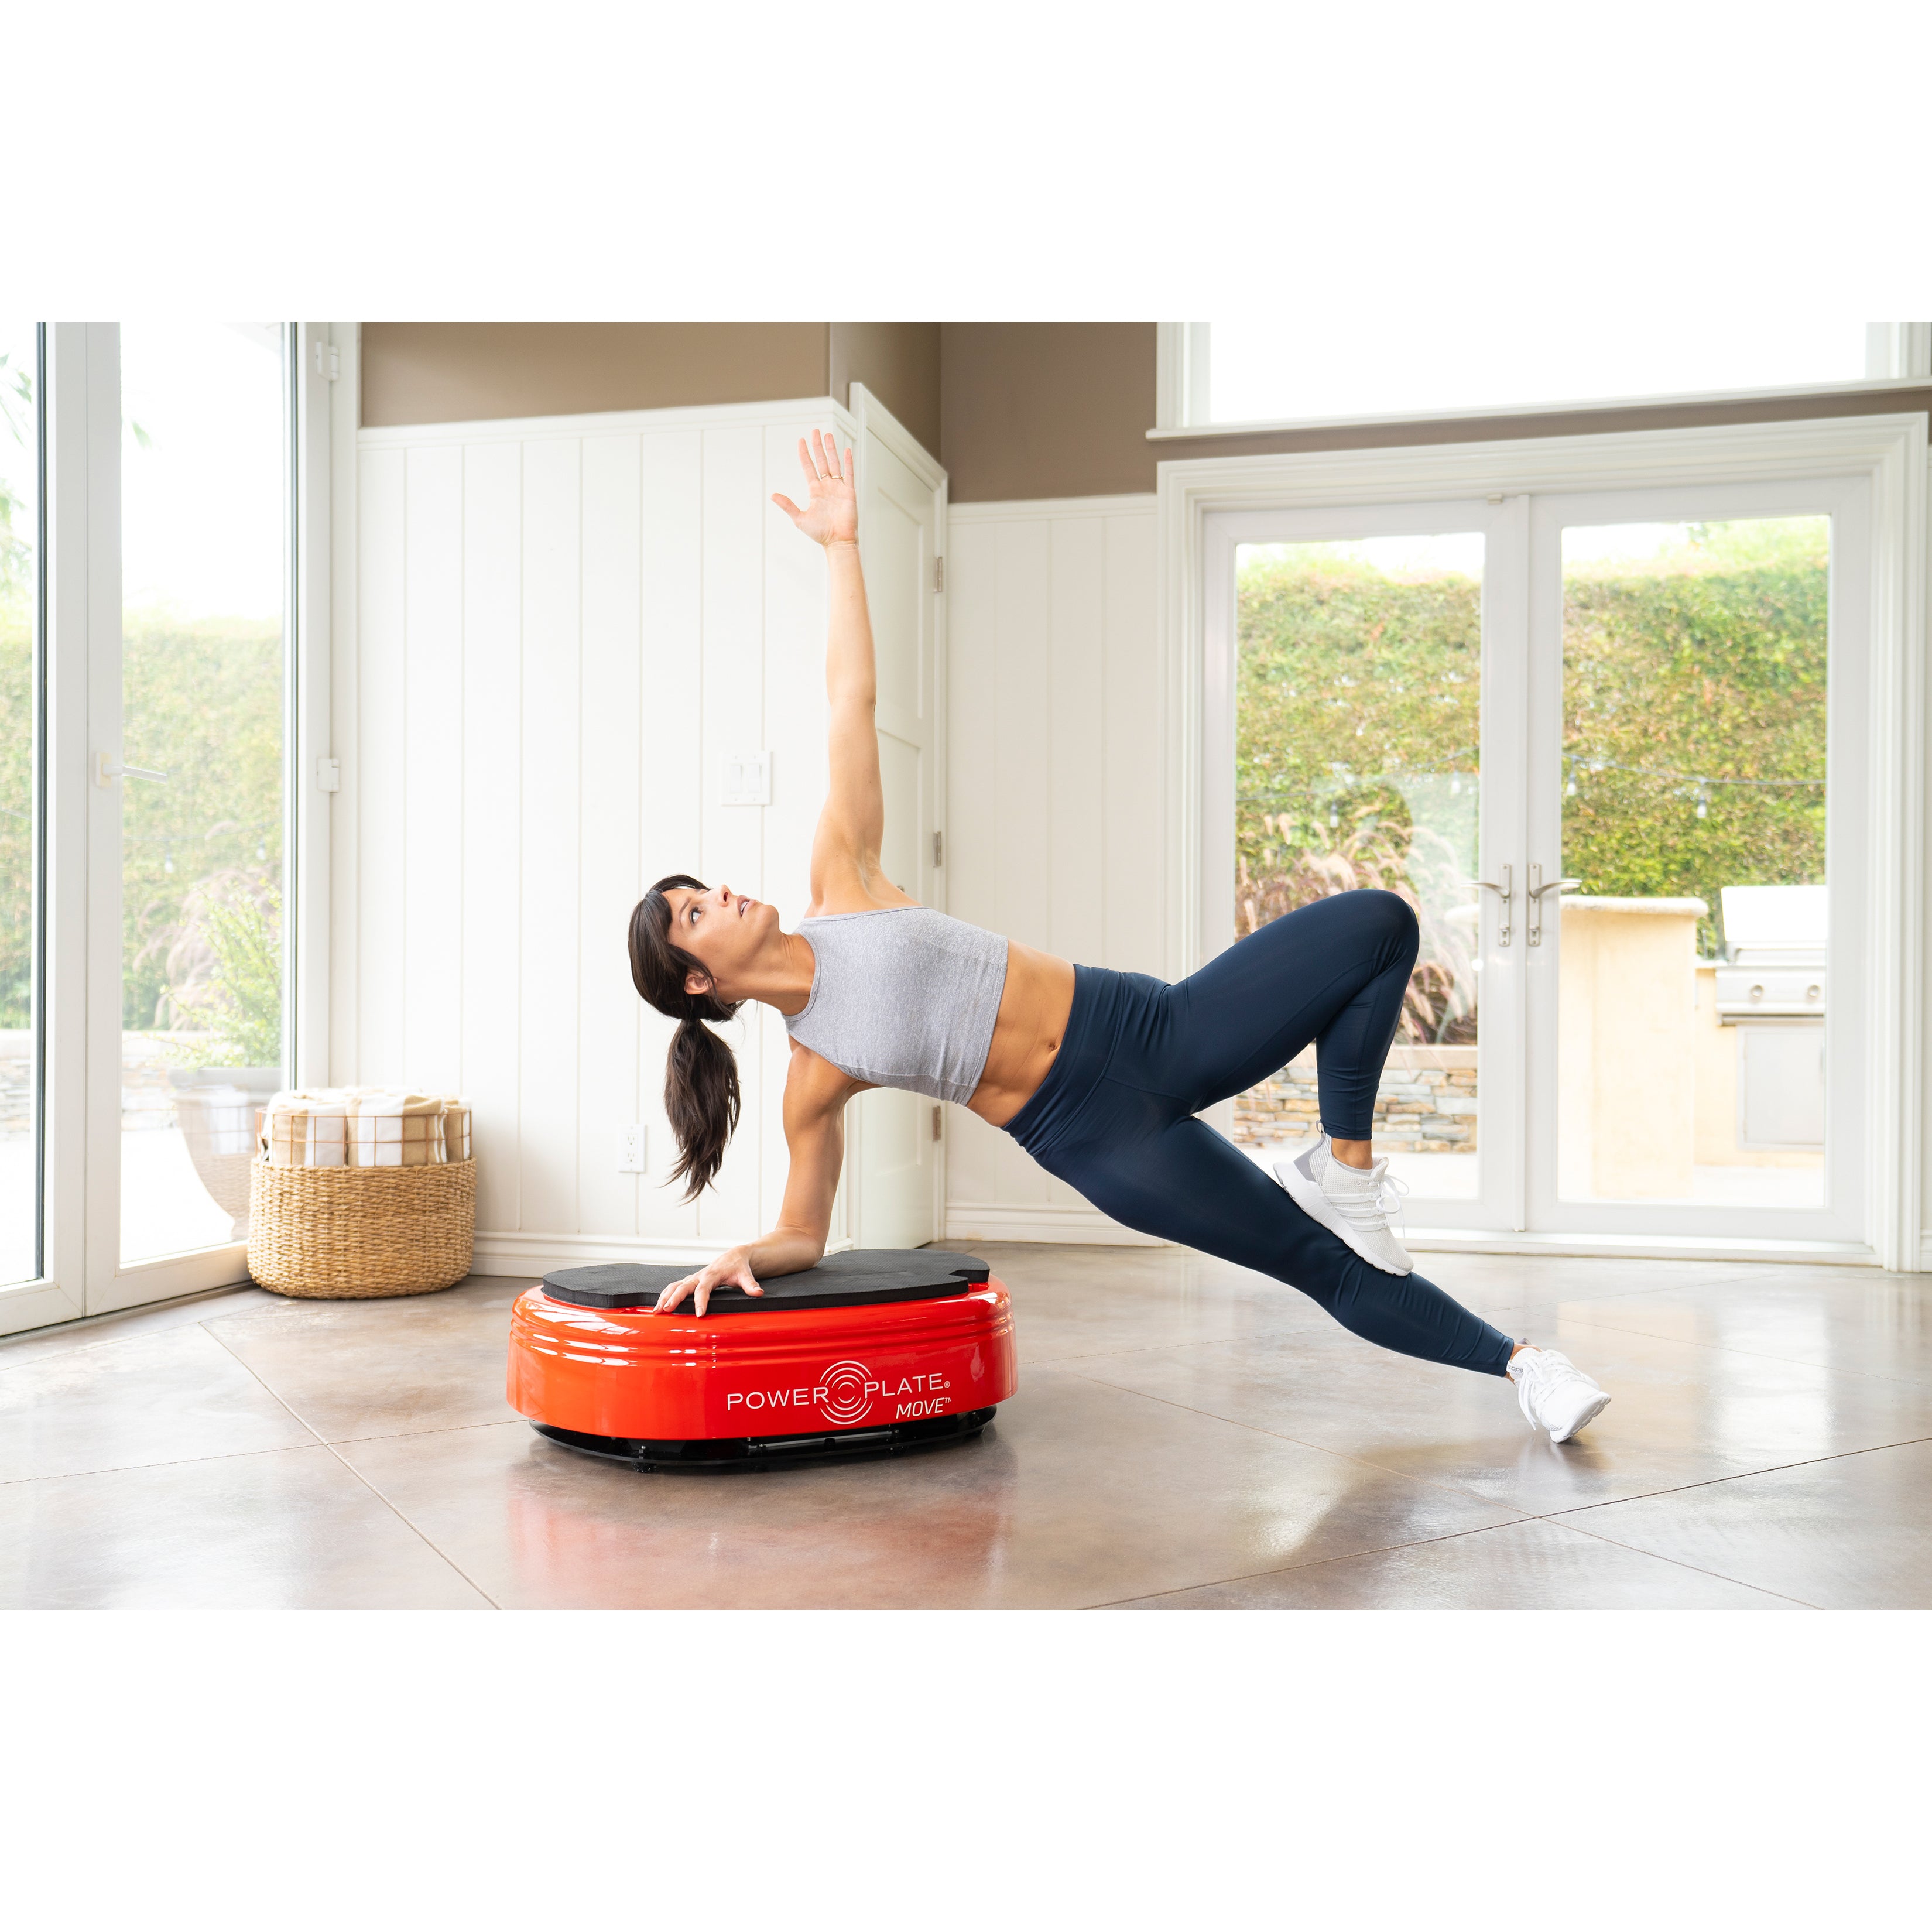 Power Plate Move